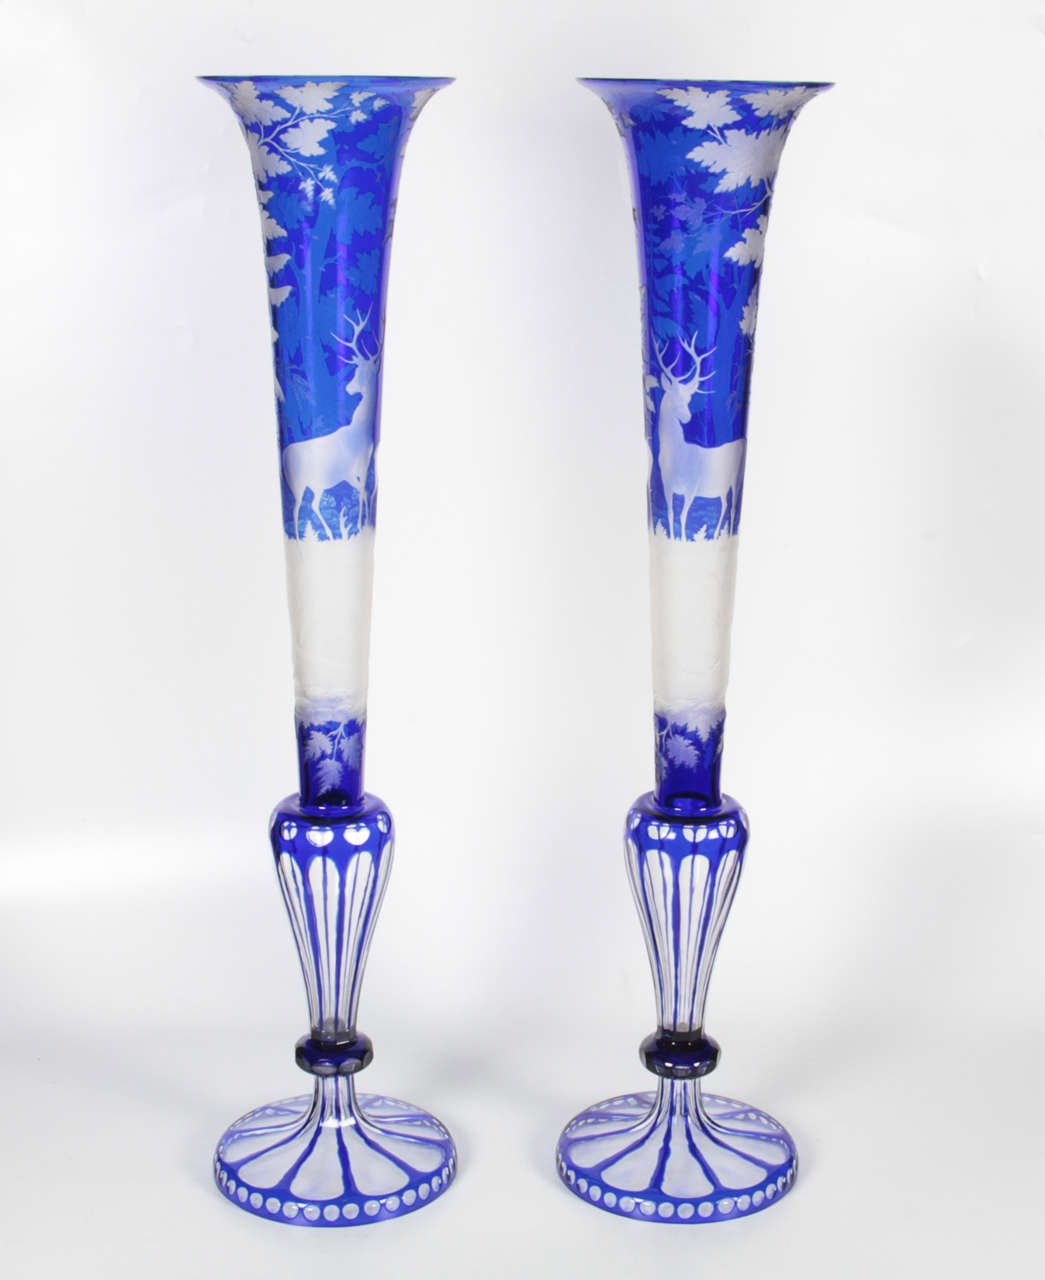 Magnificent pair of palatial double overlay cobalt blue over clear Bohemian crystal trumpet-shaped vases, hand engraved with scenes of stags in a forest; attributed to August Bohm. The stags are deeply carved with magnificent details to demonstrate